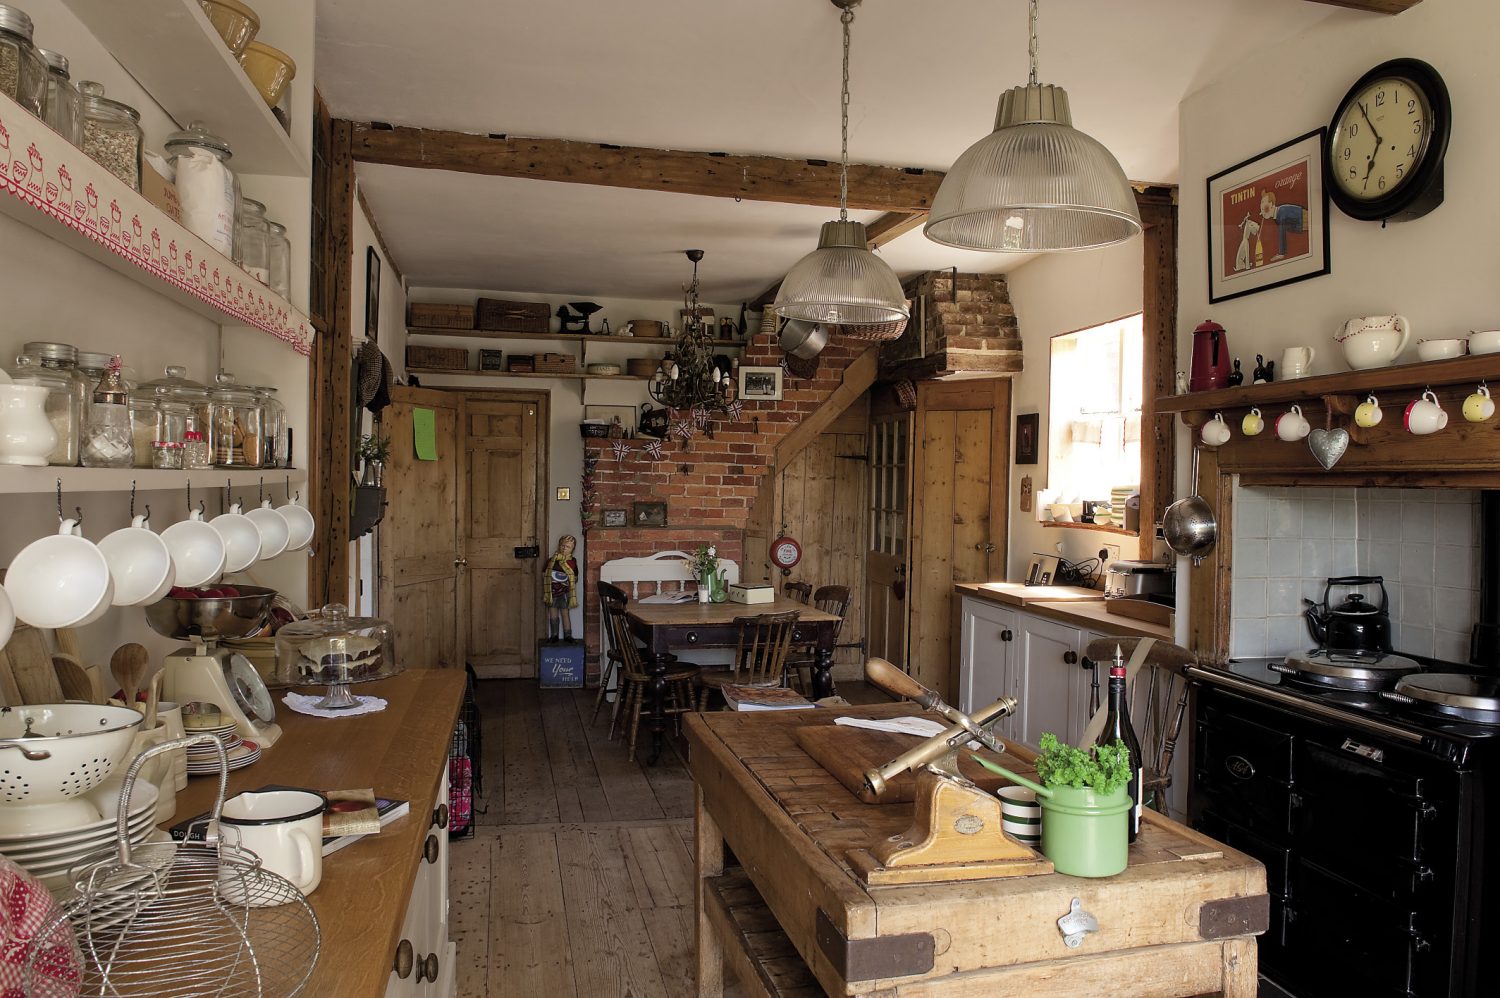 The kitchen is evidently the hub of the house. Simple in tone, it is very much a working environment, with a black enamel Aga and a deeply scored butcher’s block in the centre